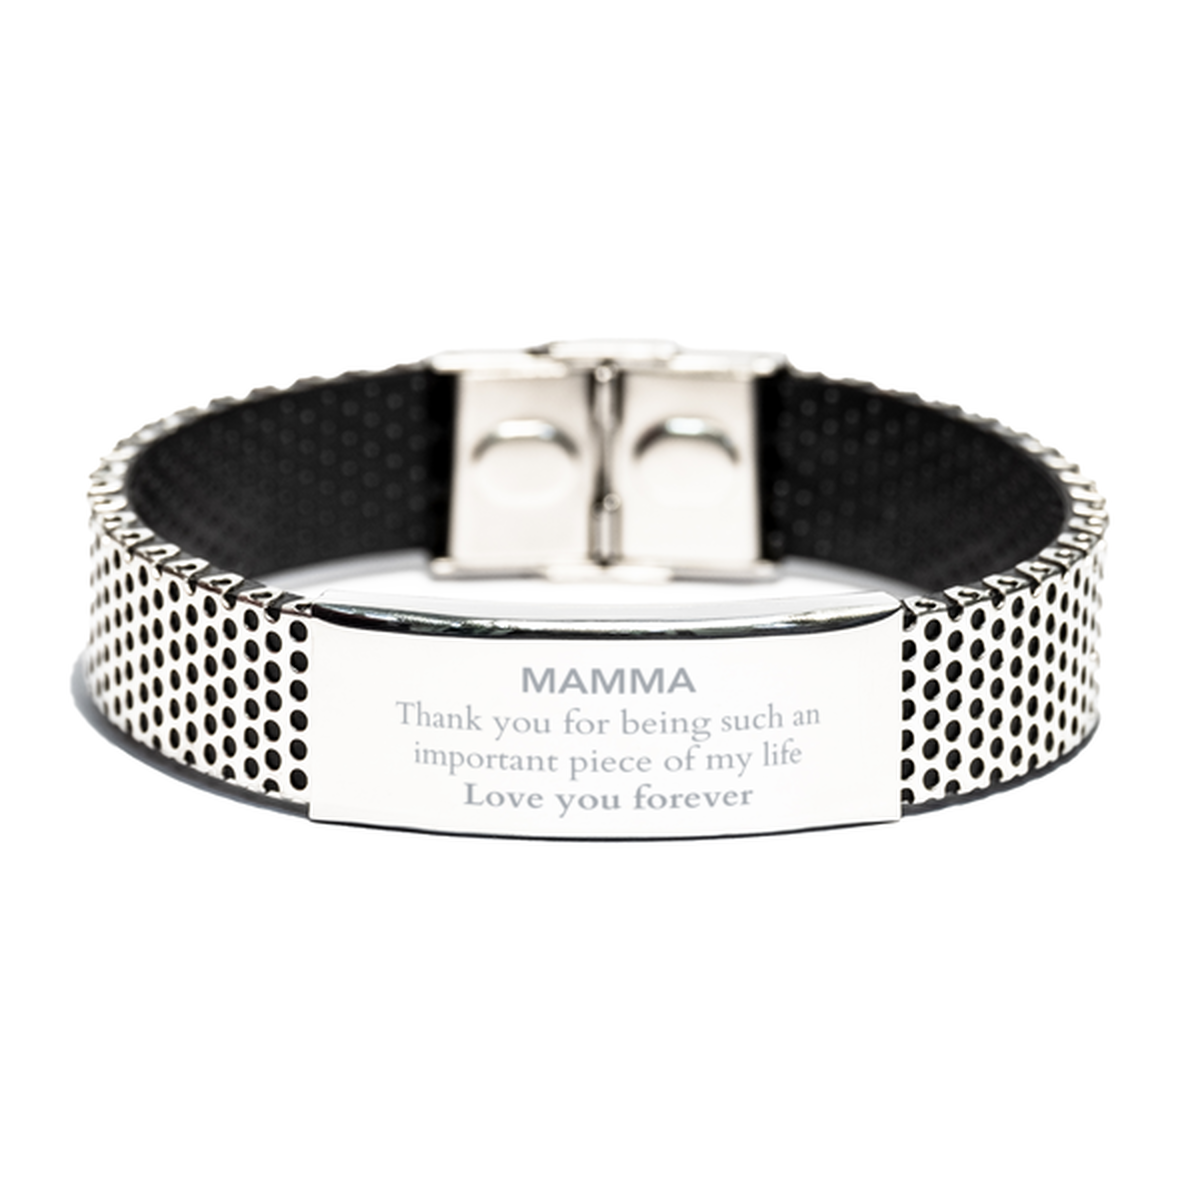 Appropriate Mamma Stainless Steel Bracelet Epic Birthday Gifts for Mamma Thank you for being such an important piece of my life Mamma Christmas Mothers Fathers Day